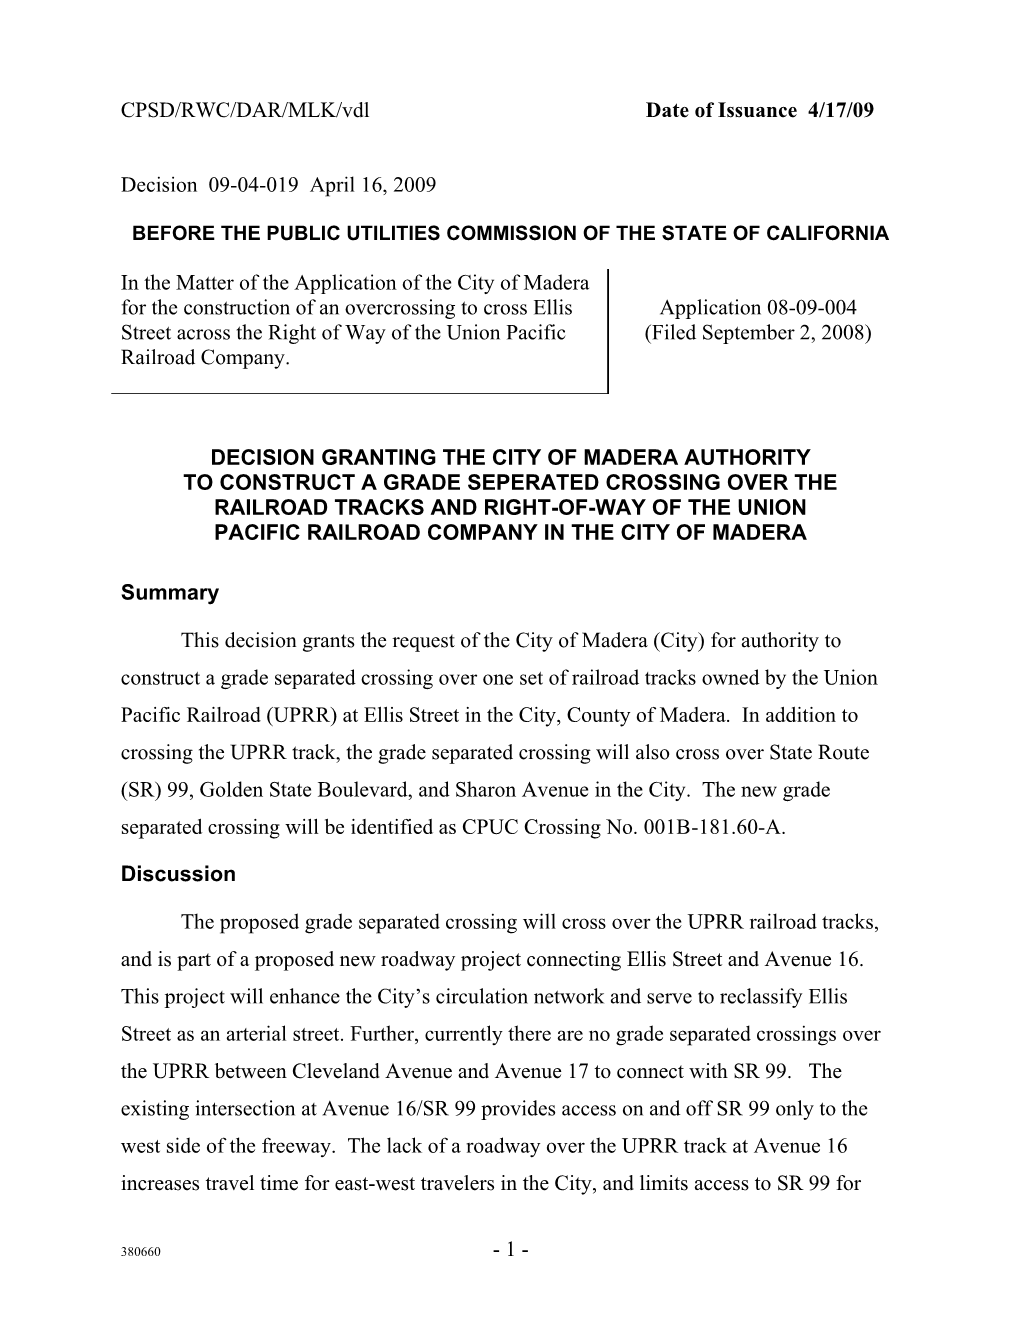 CPSD/RWC/DAR/MLK/Vdl Date of Issuance 4/17/09